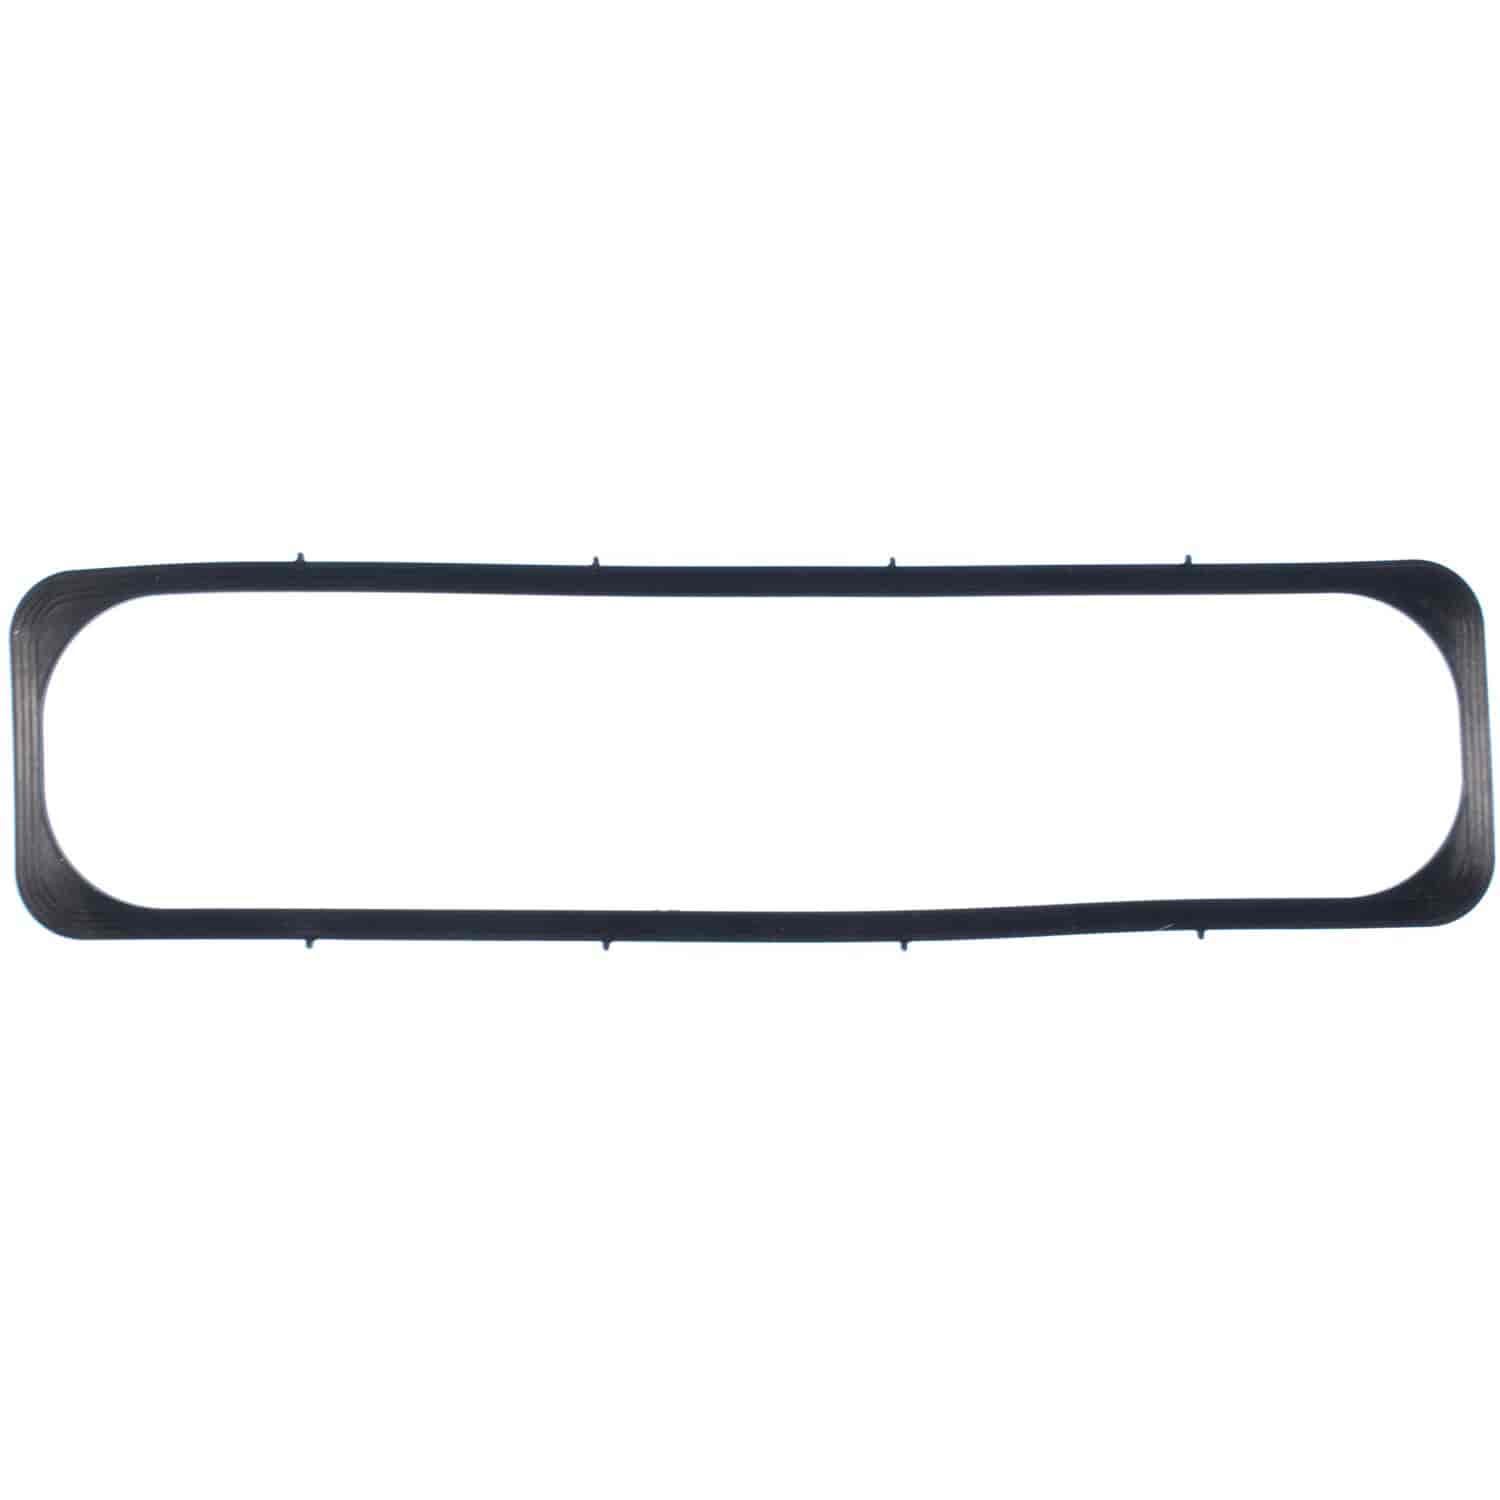 Single Valve Cover Gasket 1986-2002 Small Block Chevy 305/350 (5.0/5.7L) in Molded Rubber